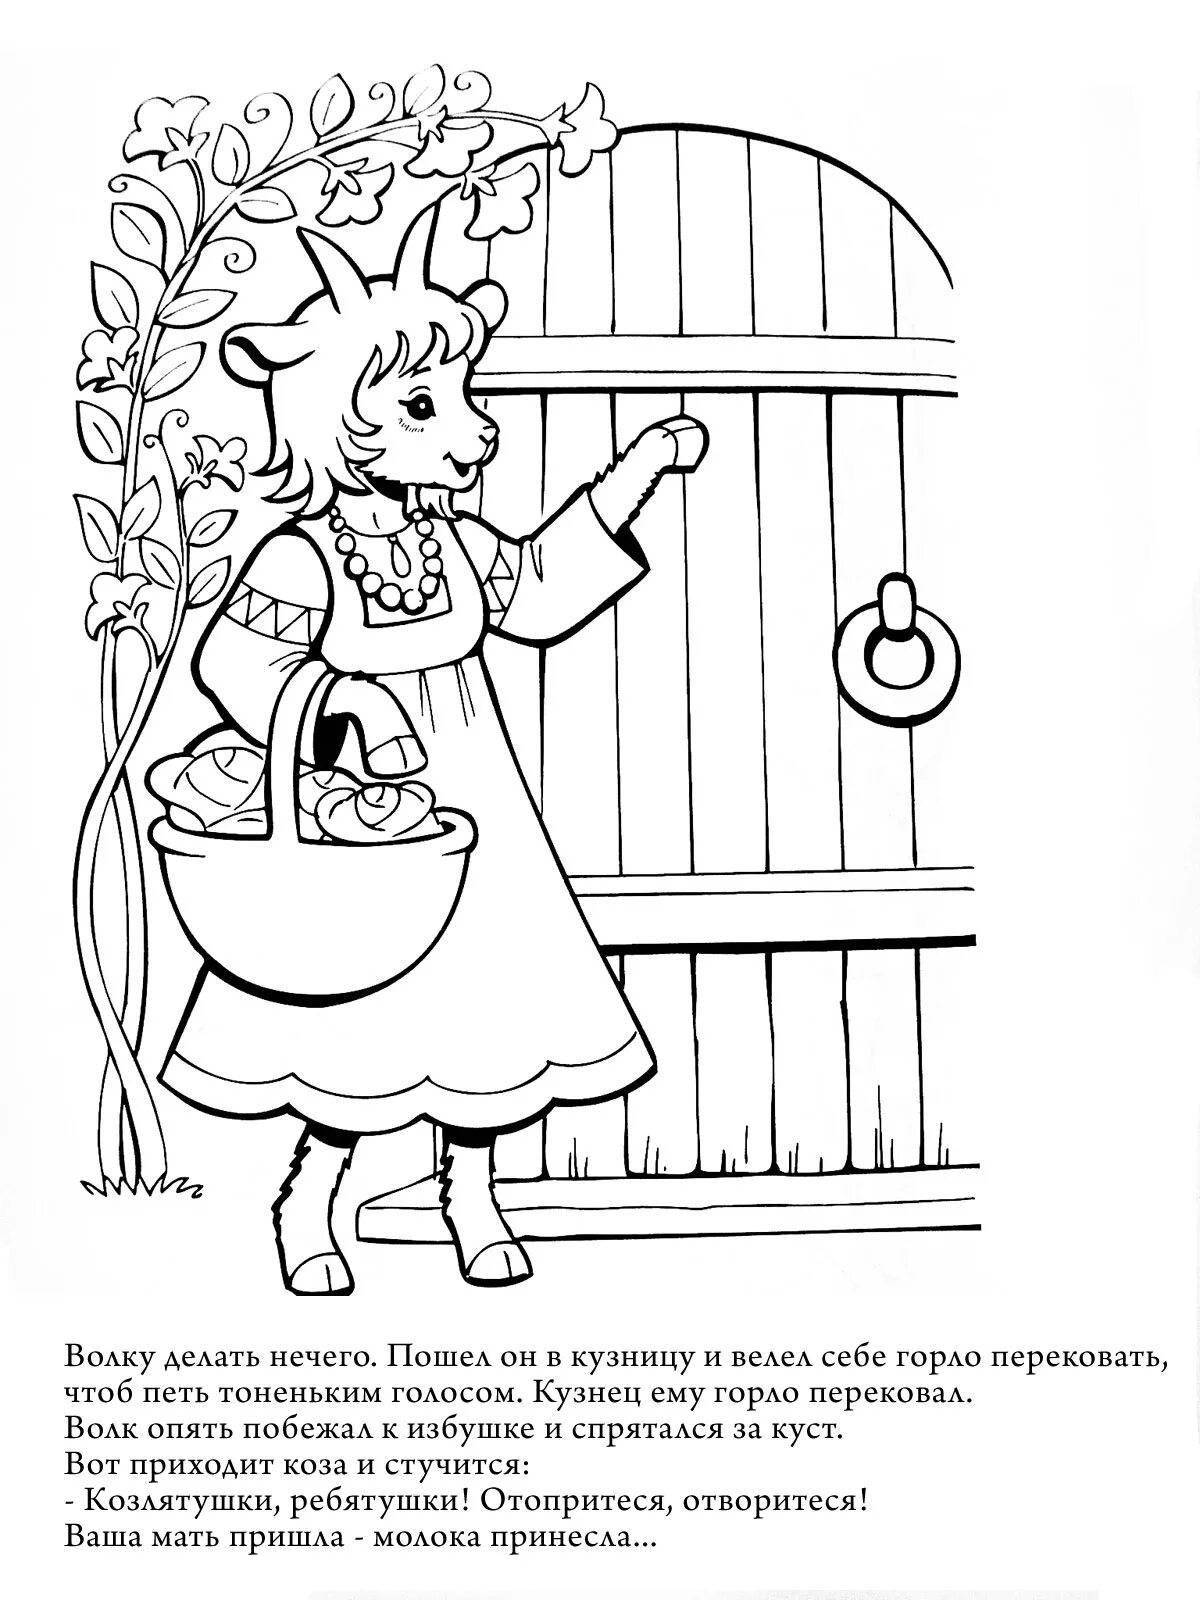 Coloring page of the magic wolf and the seven children